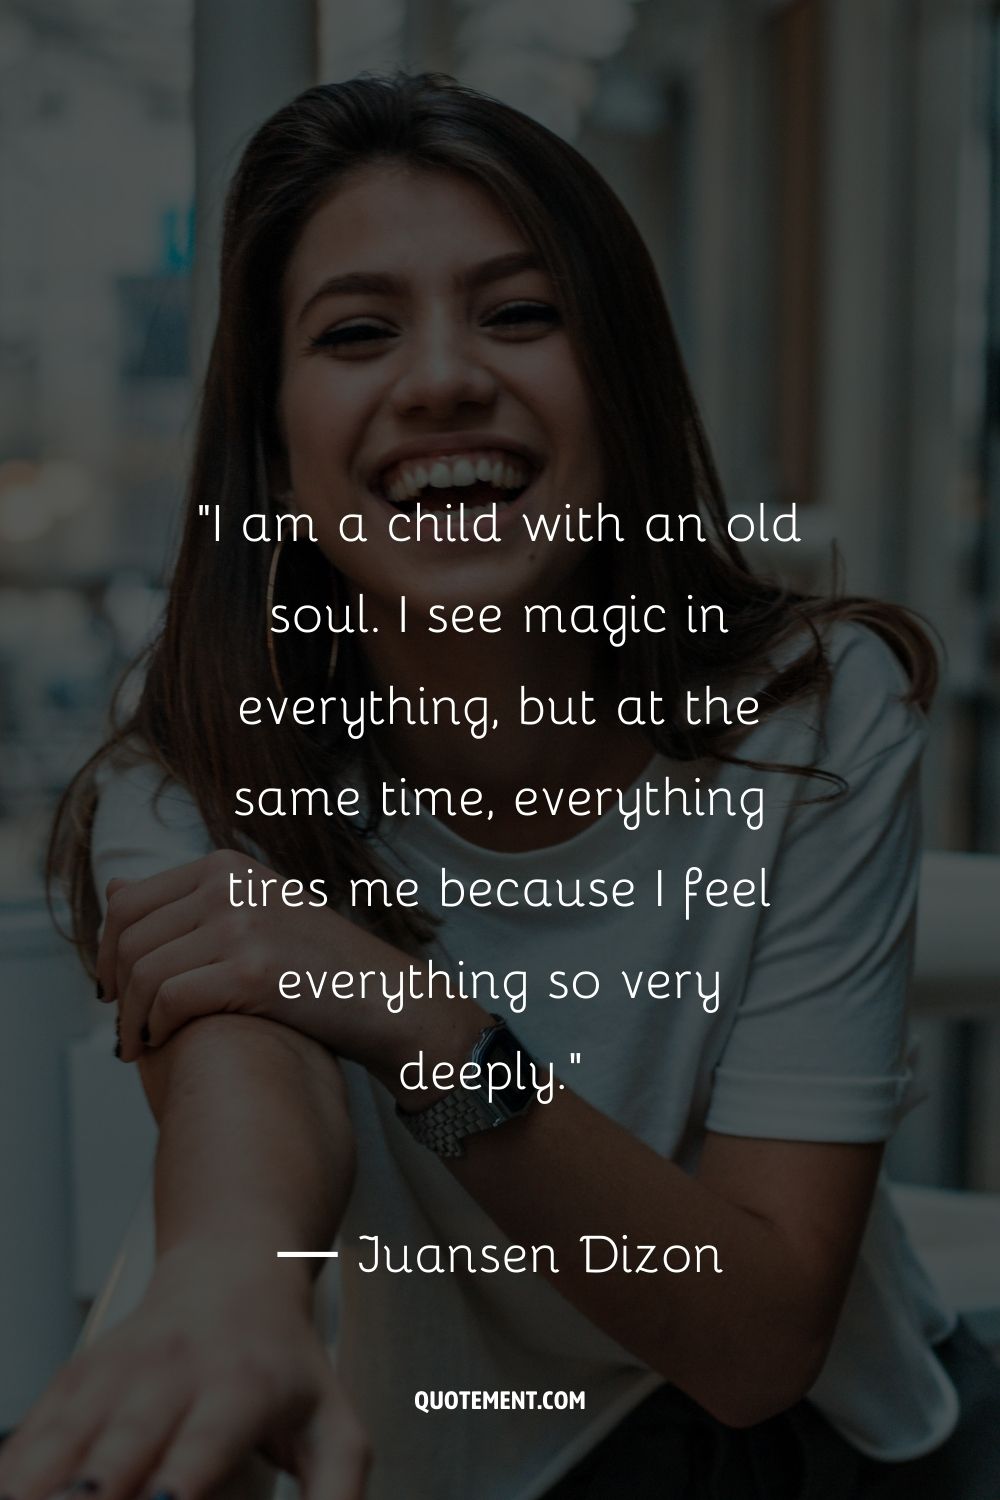 I am a child with an old soul. I see magic in everything, but at the same time, everything tires me because I feel everything so very deeply.